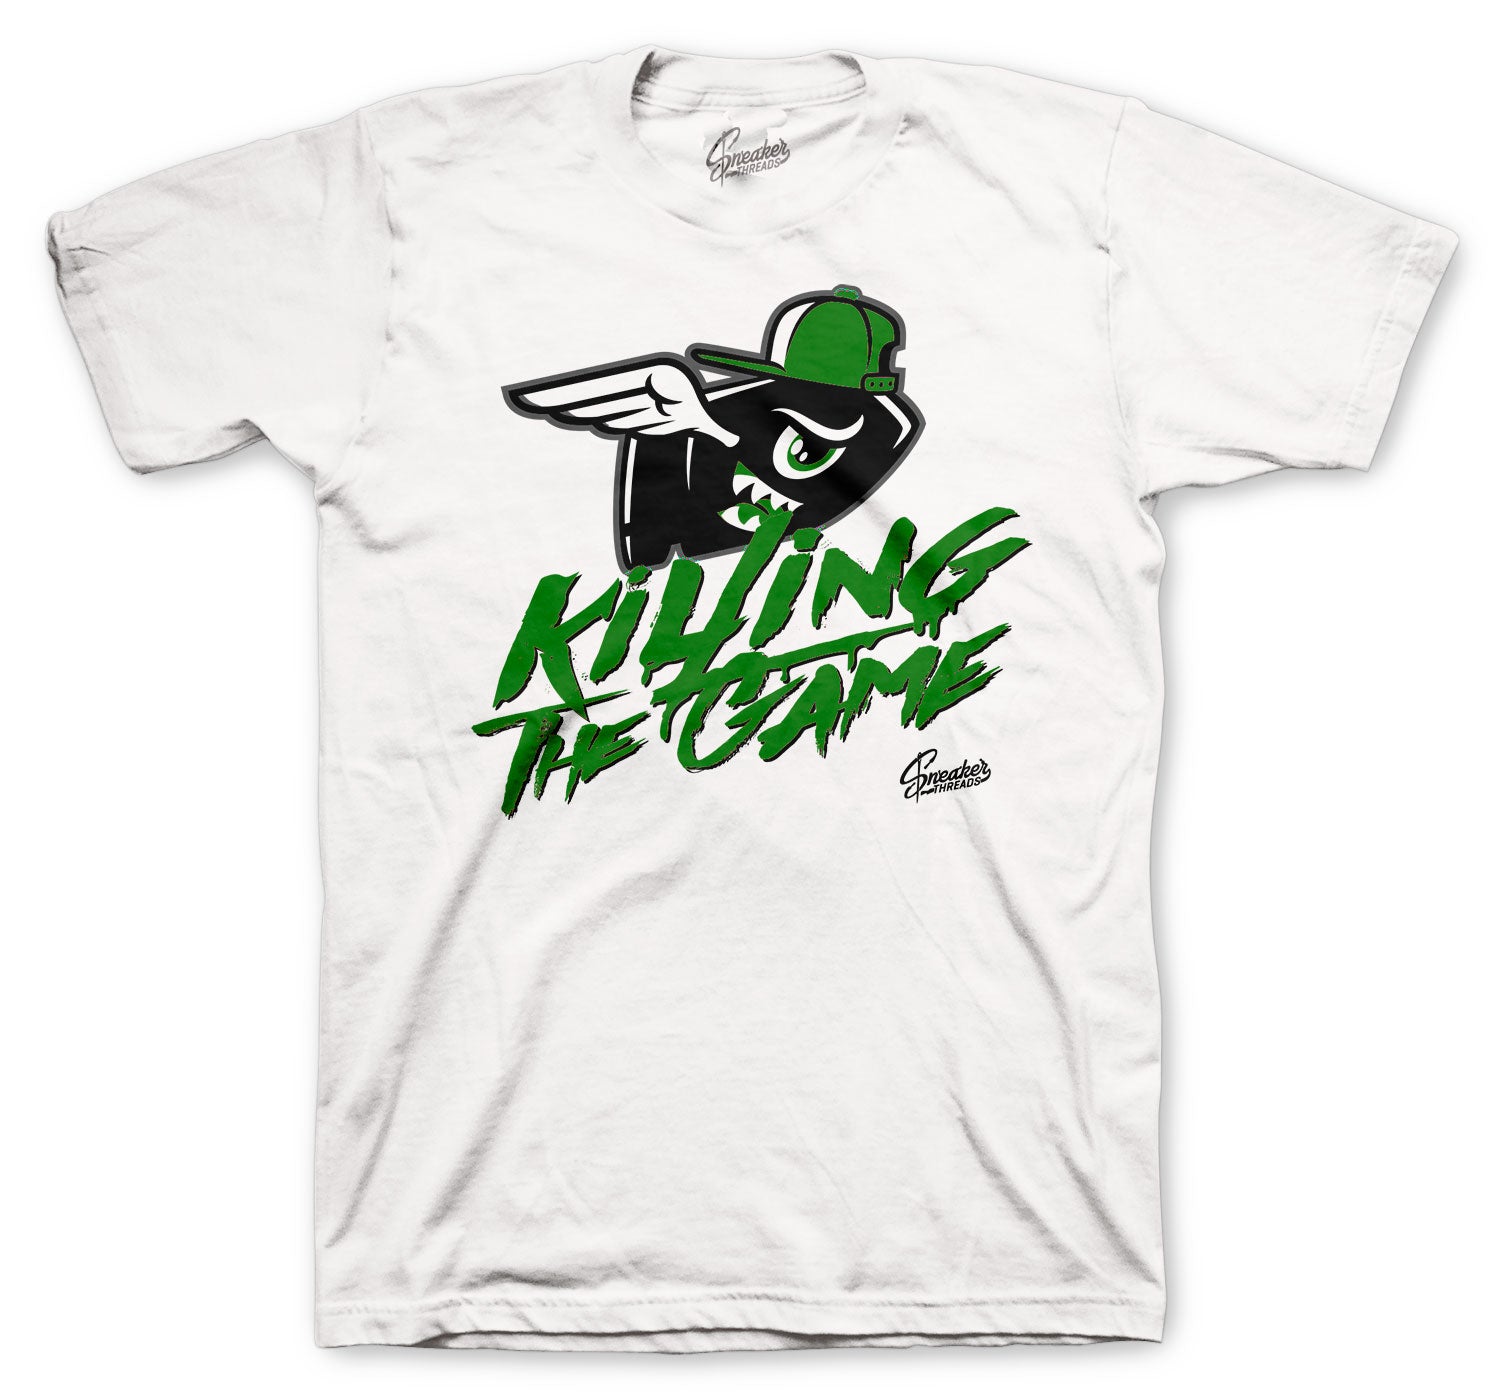 Jordan 4 Green Metallic sneaker collection matching with tee collection 